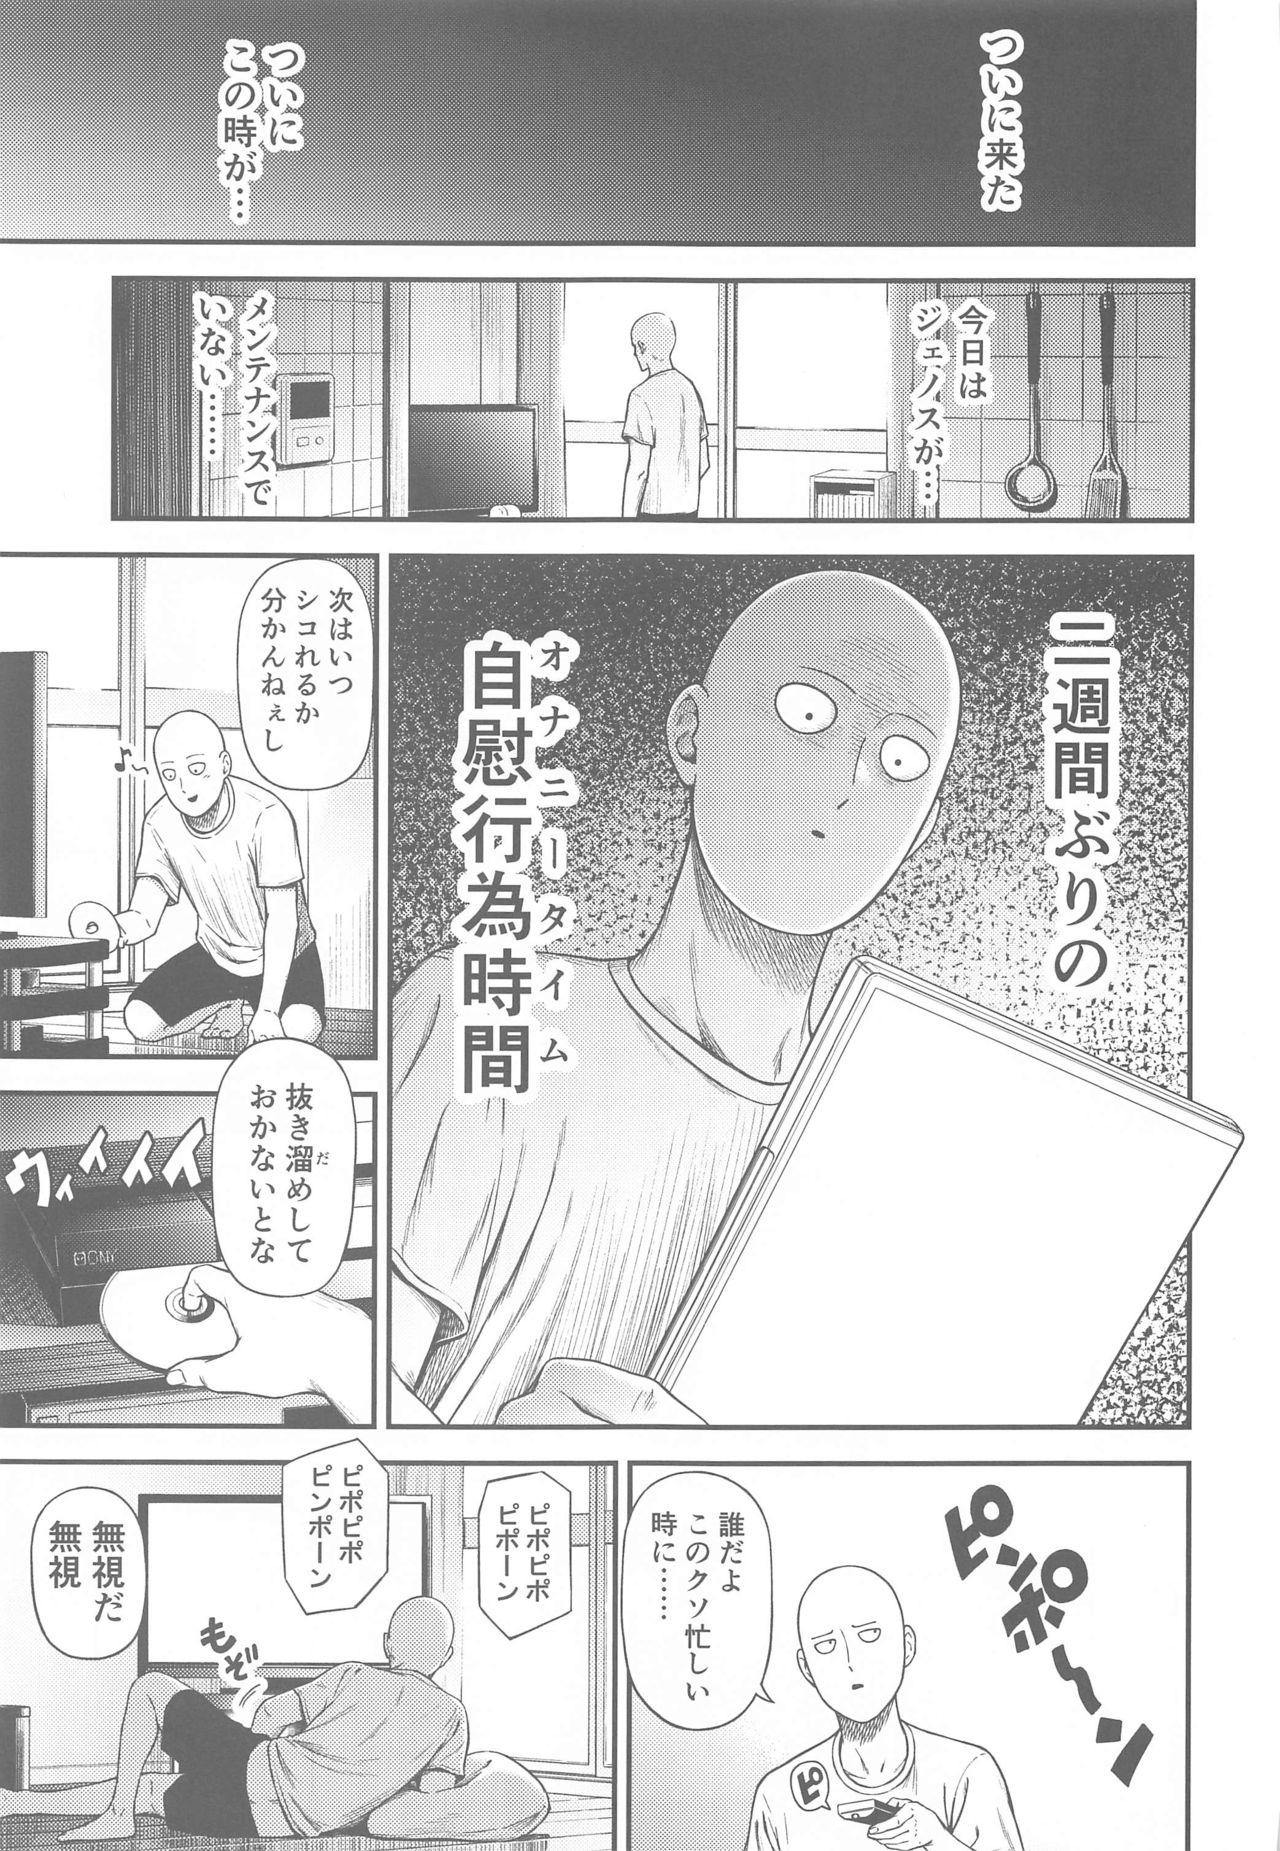 Relax ONE-HURRICANE 6.5 - One punch man Dorm - Page 2